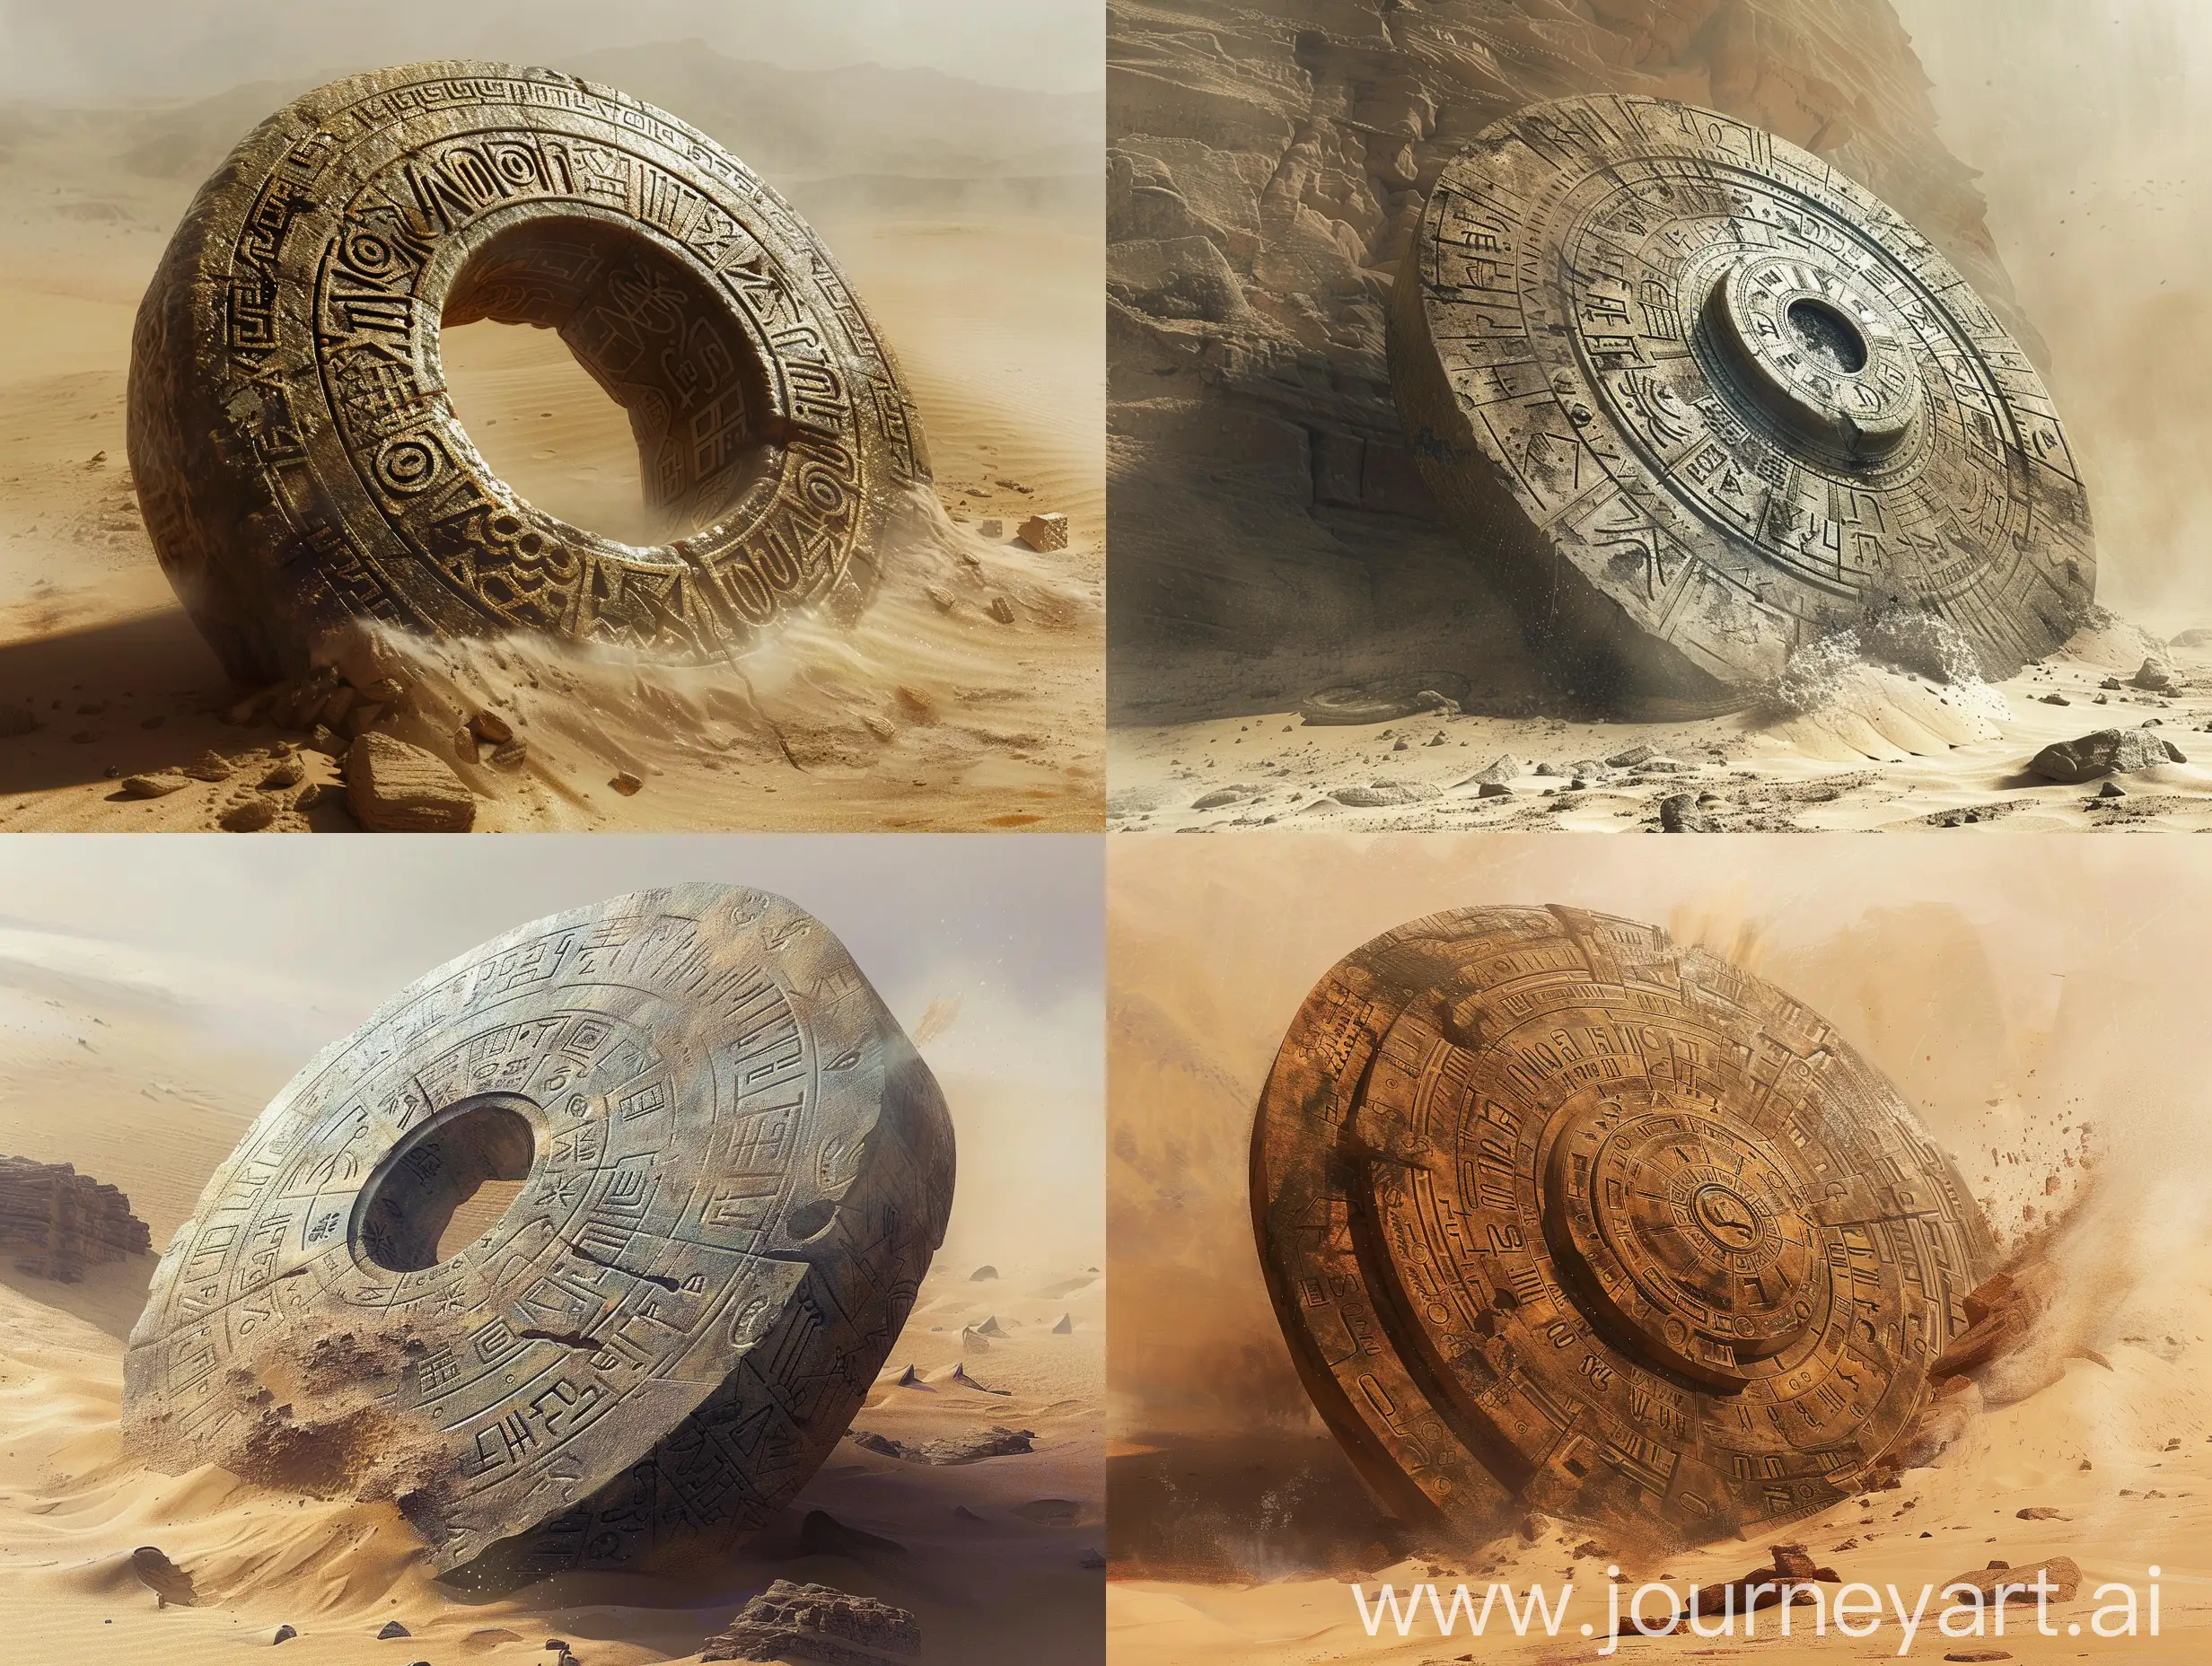 Mysterious-Ancient-Stone-Artifact-in-Desert-with-Intricate-Patterns